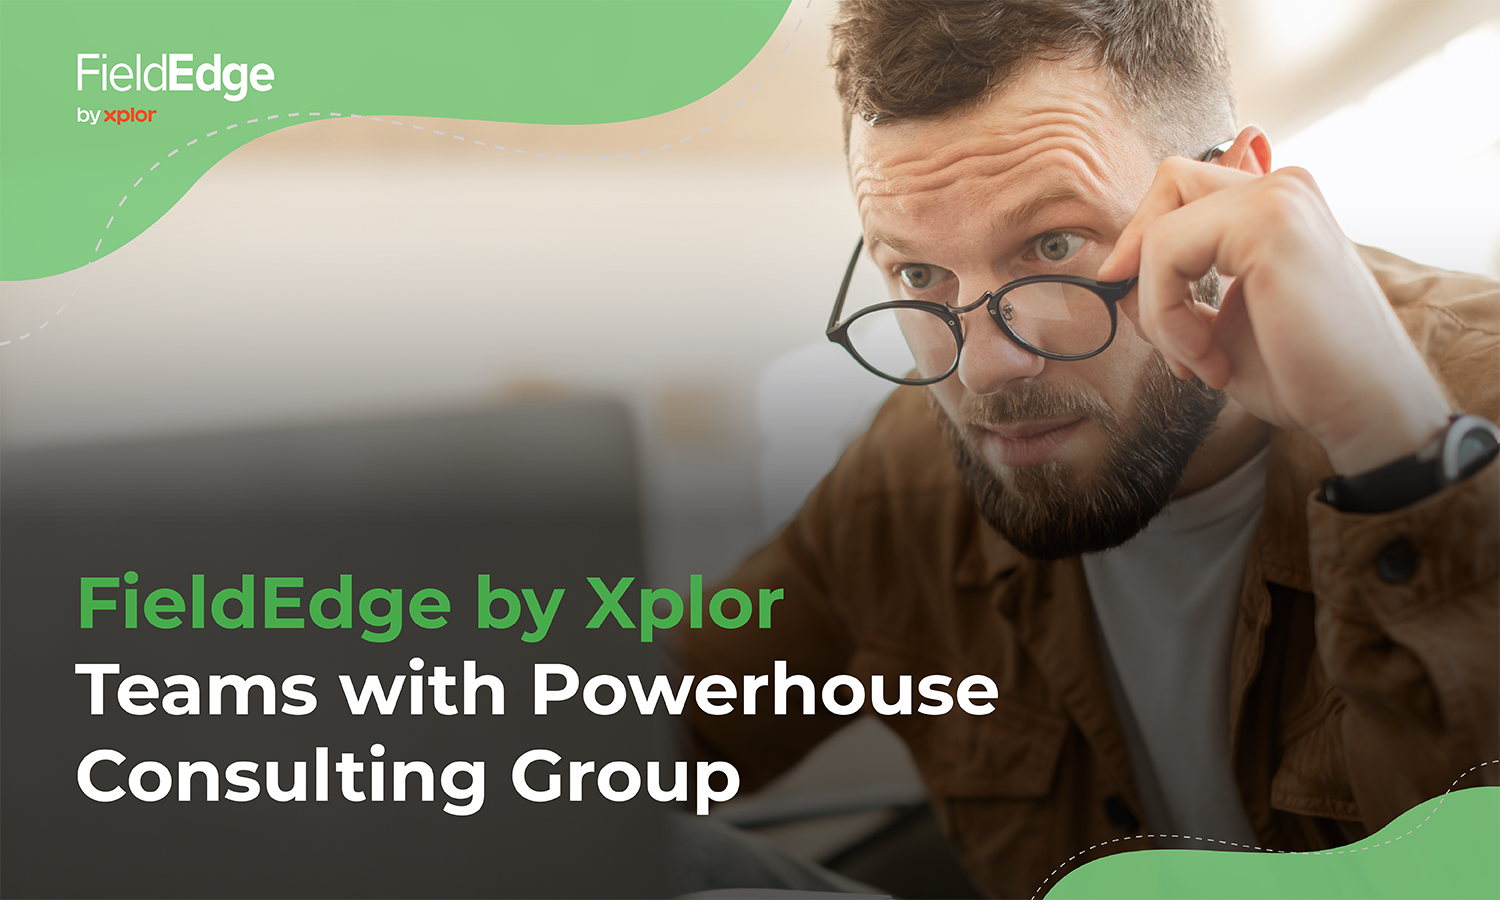 fieldedge by xplor teams with powerhouse consulting group